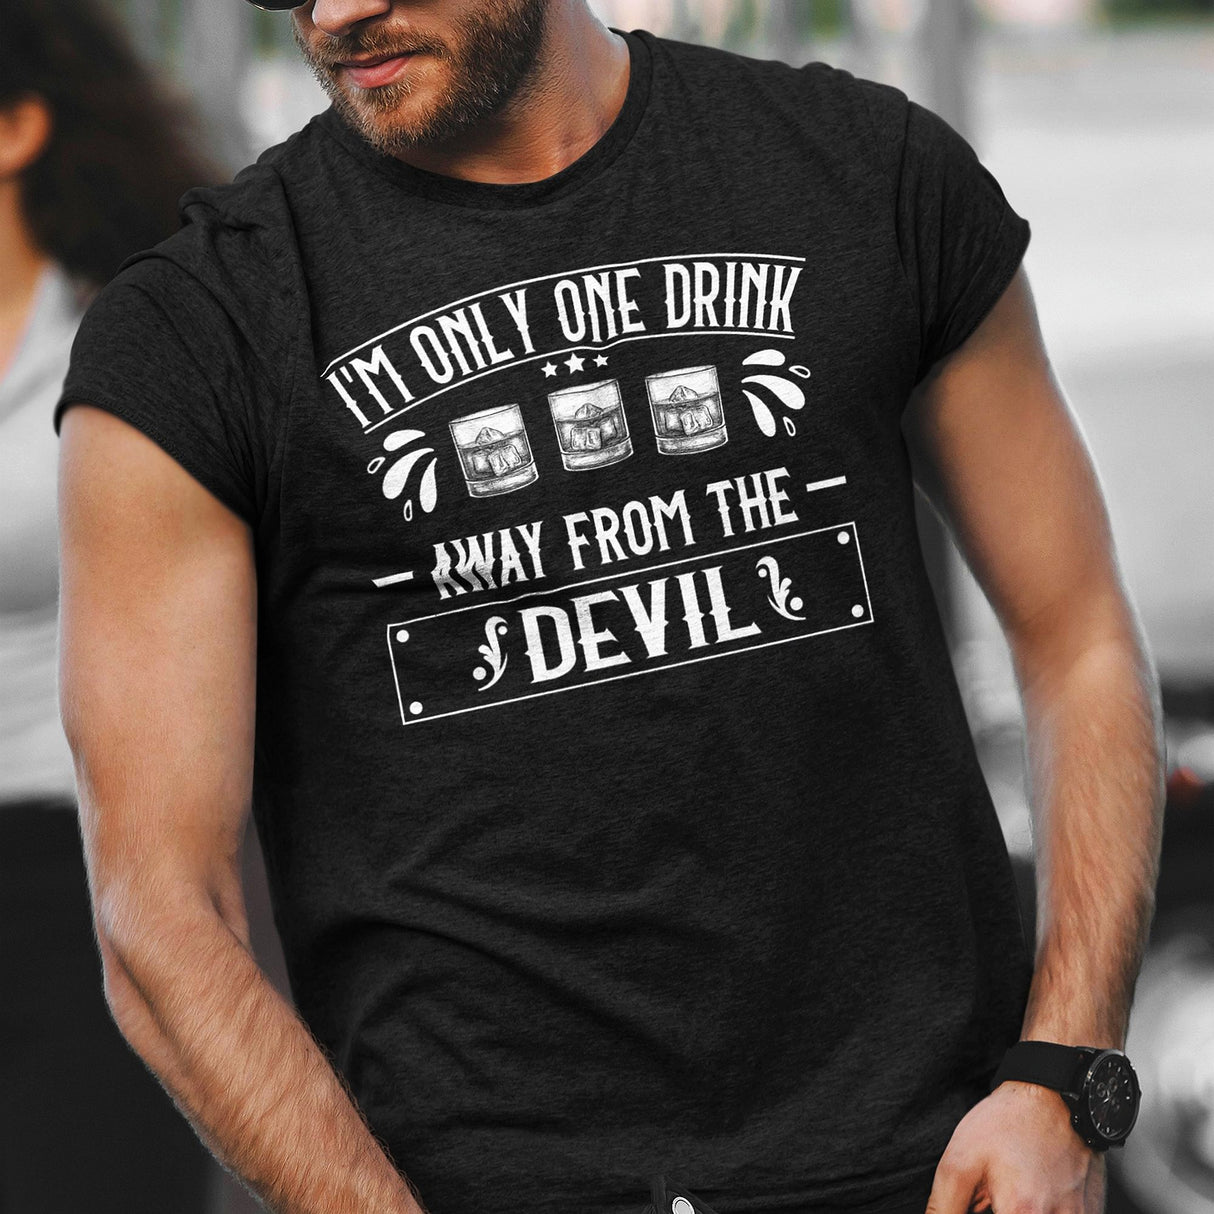 im-only-one-drink-away-from-the-devil-food-tee-life-t-shirt-sassy-tee-funny-t-shirt-quirky-tee#color_black